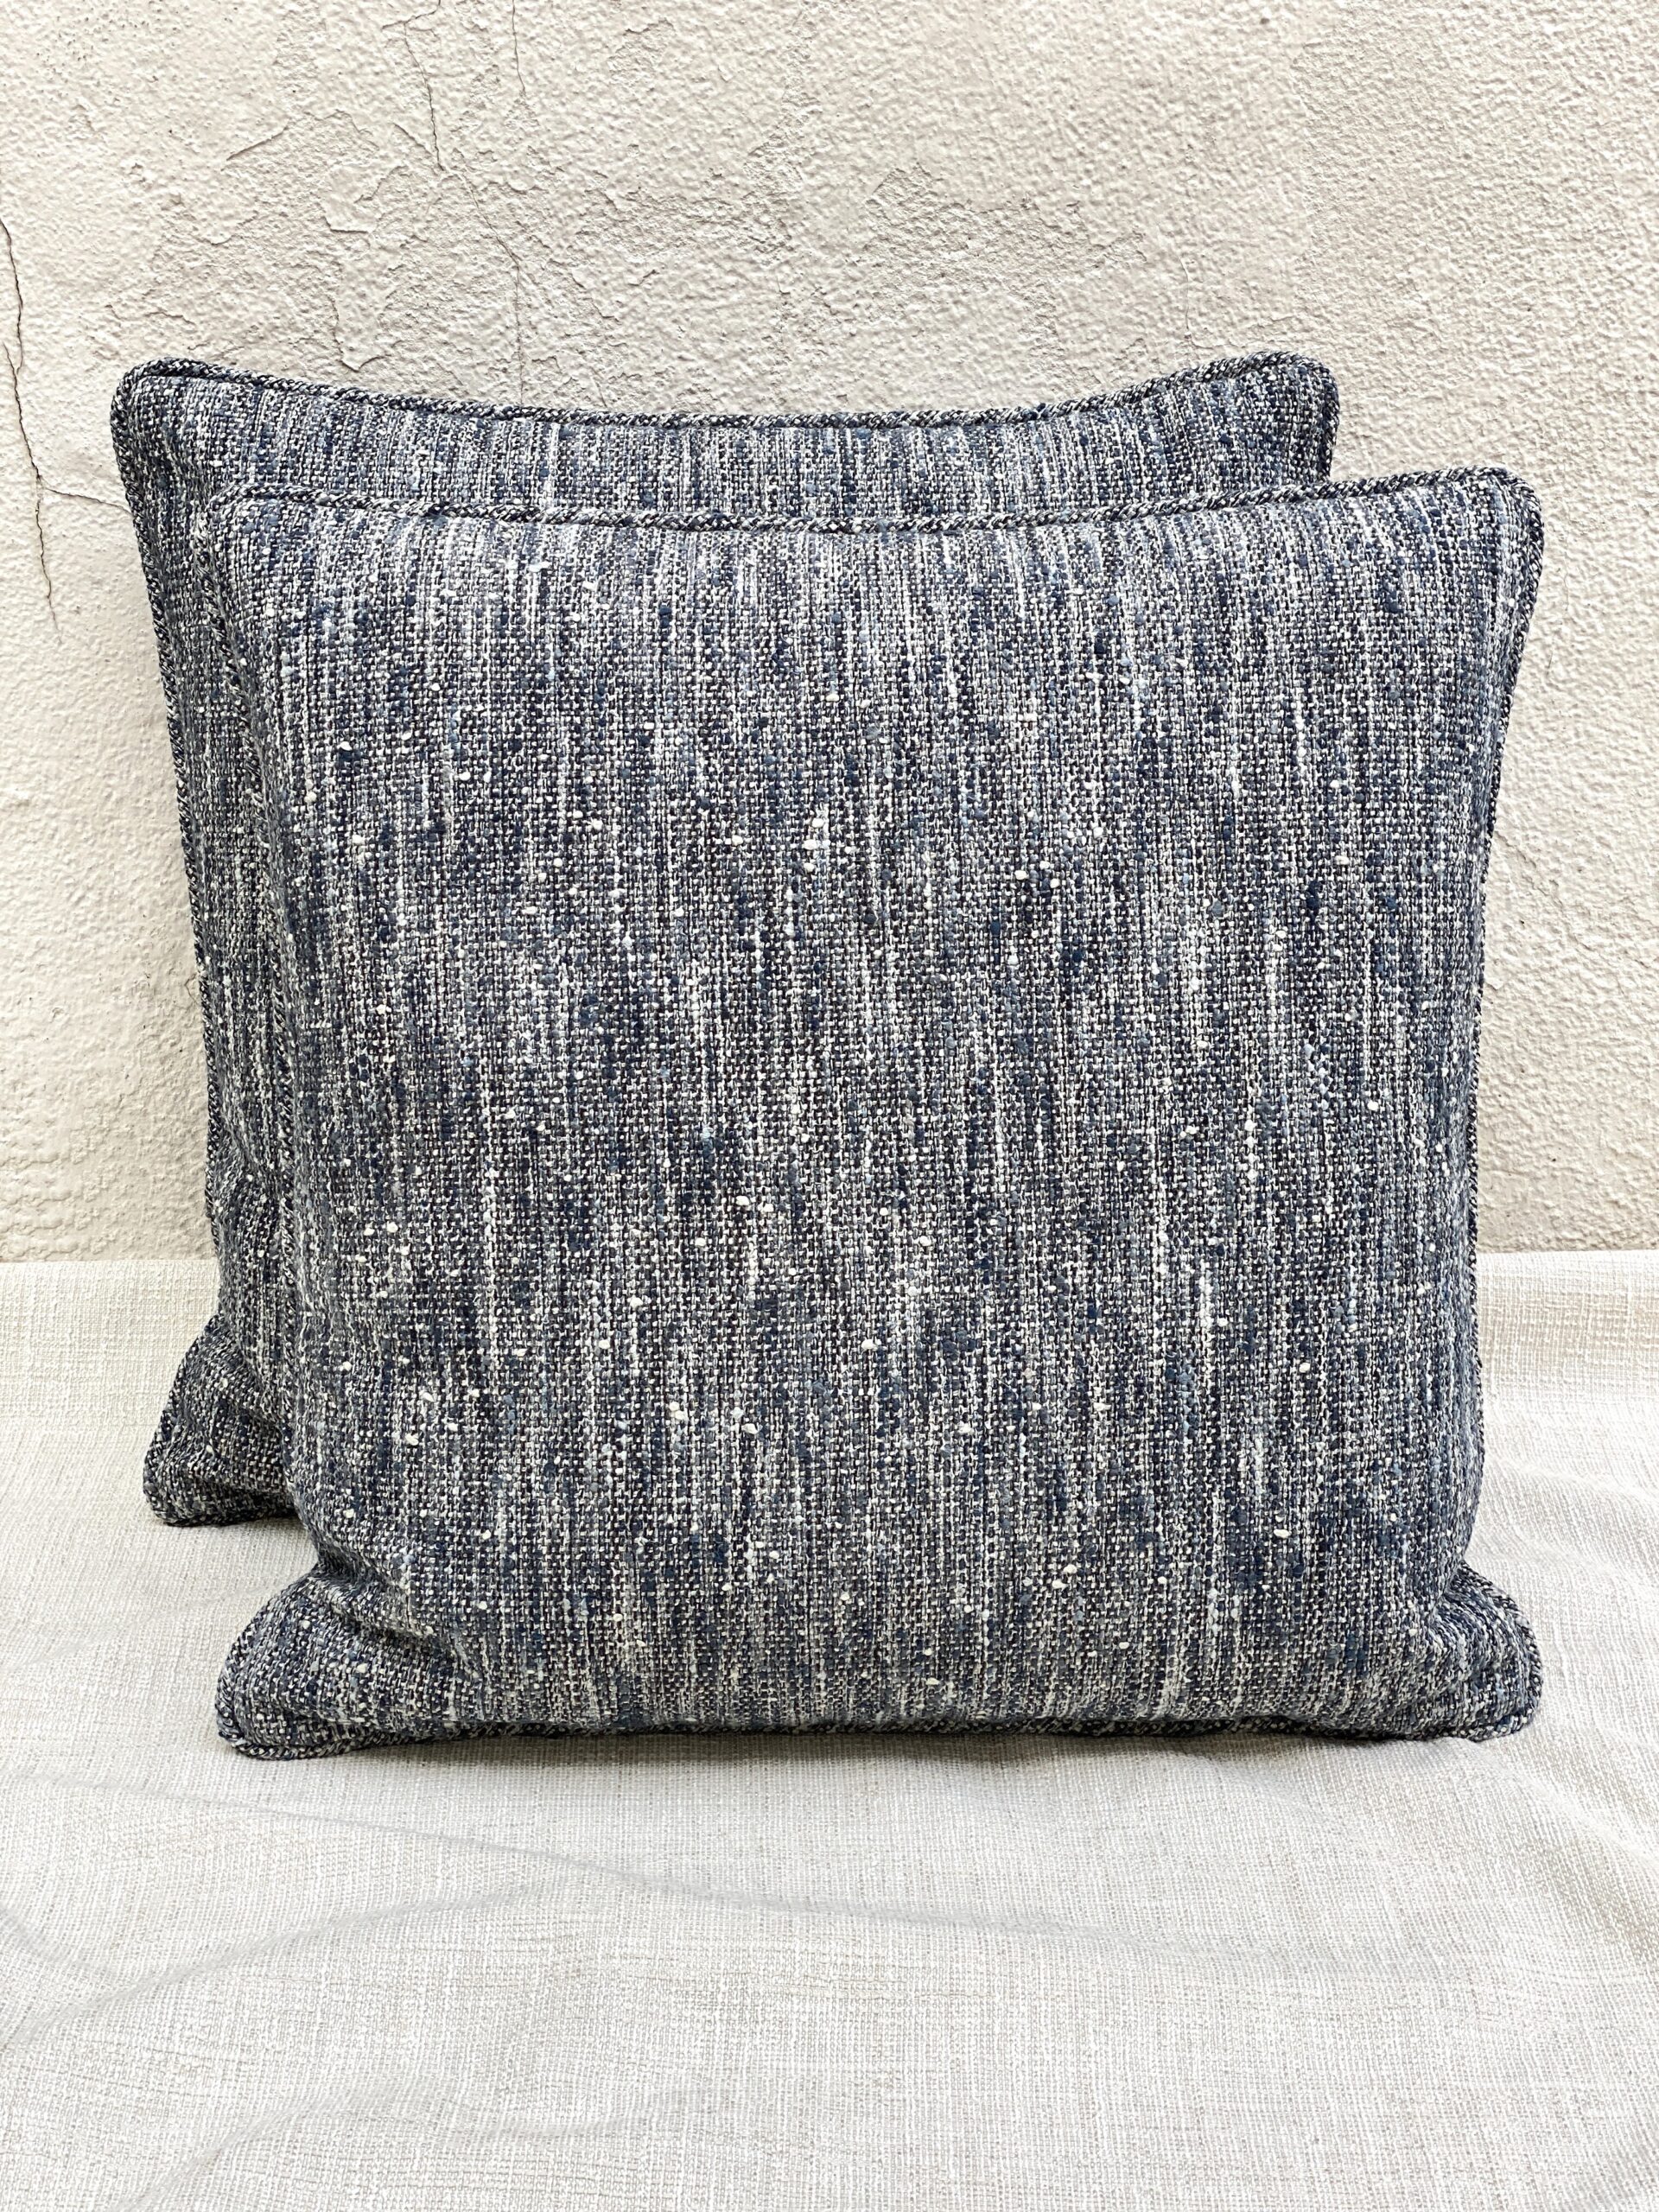 Rubelli Tweed Couleurs Pillows